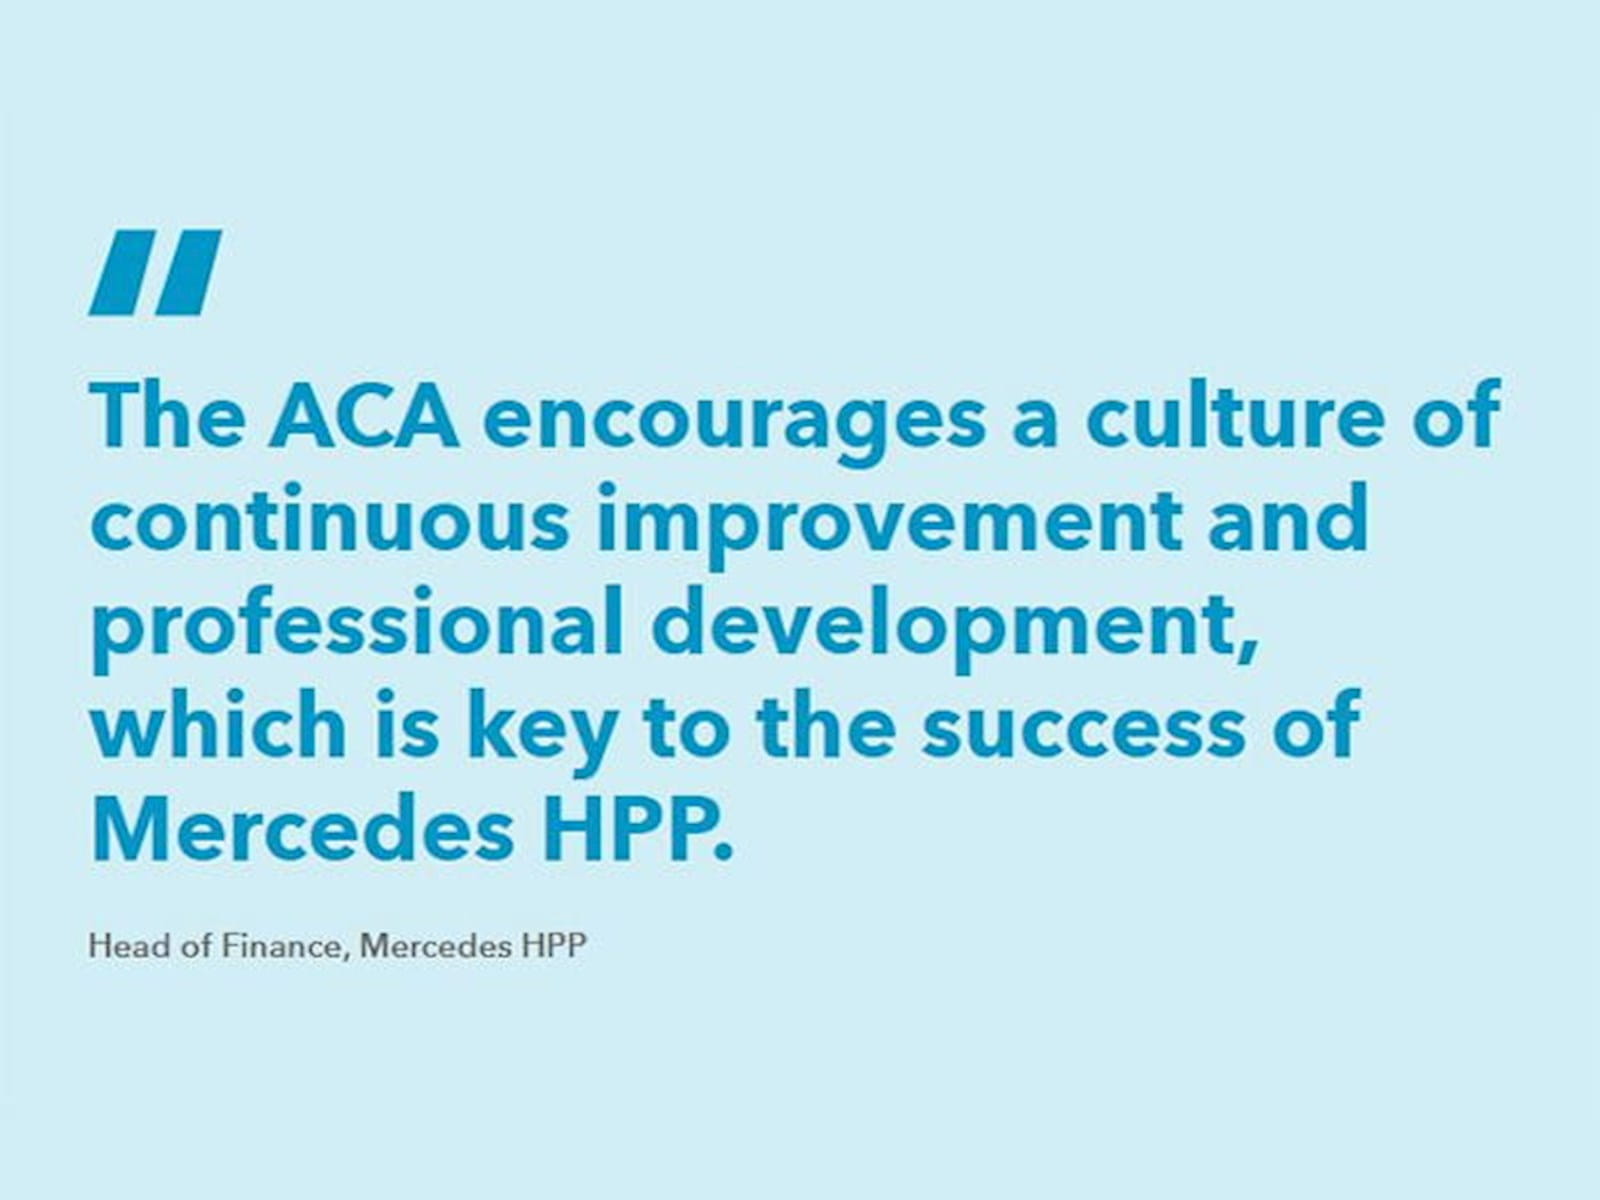 A quotation: "The ACA encourages a culture of continuous improvement and professional development, which is key to the success of Mercedes HPP." - Head of Finance, Mercedes HPP